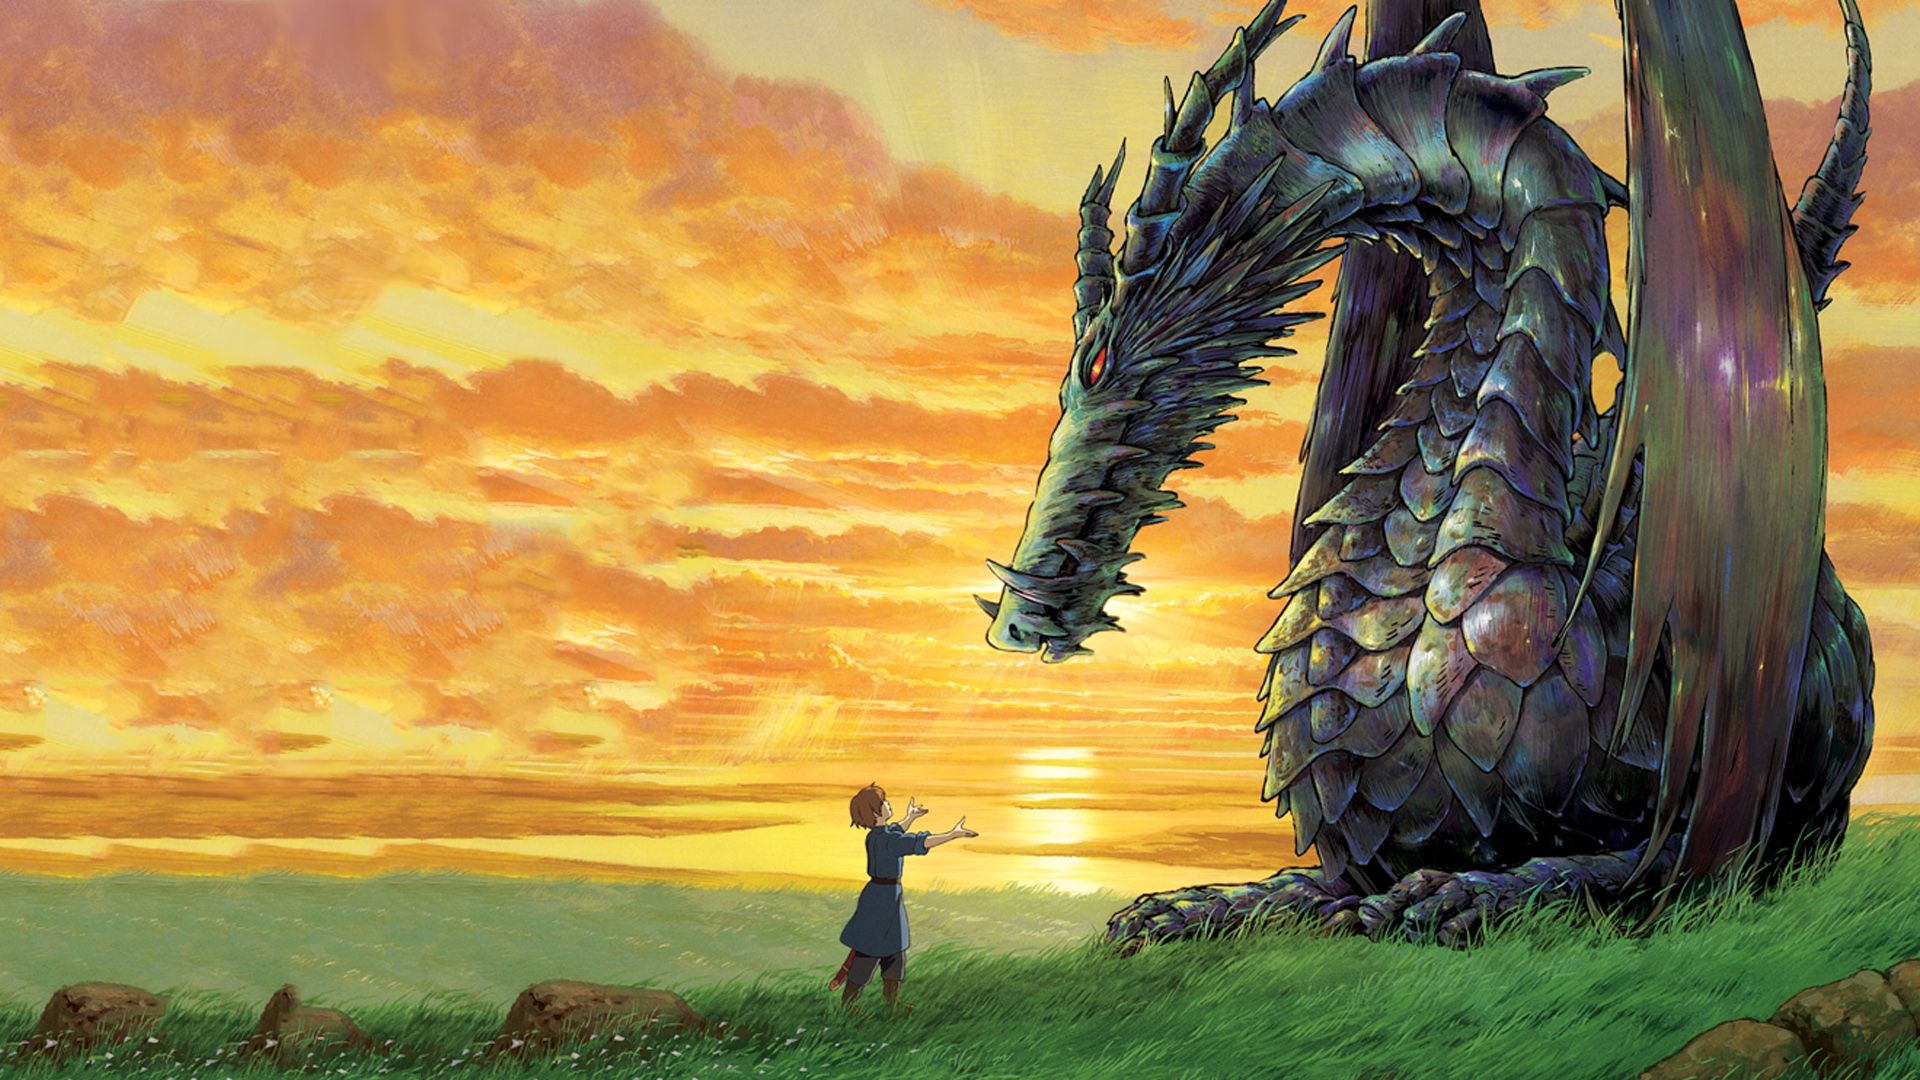 Tales from Earthsea background